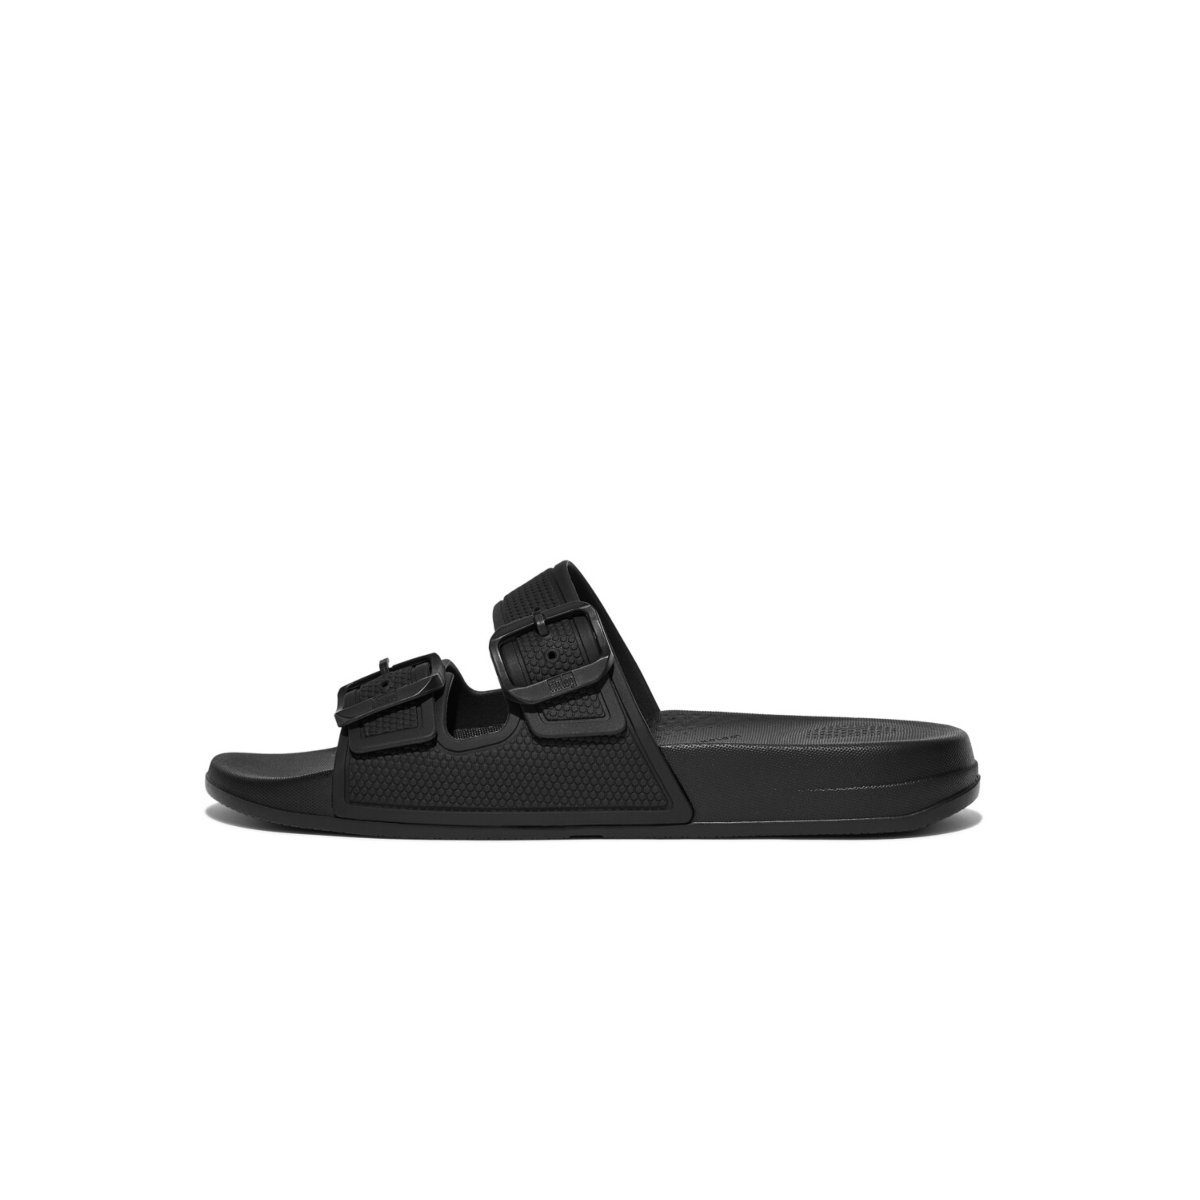 FitFlop iQUSHION Two-Bar Buckle Slides All Black front view